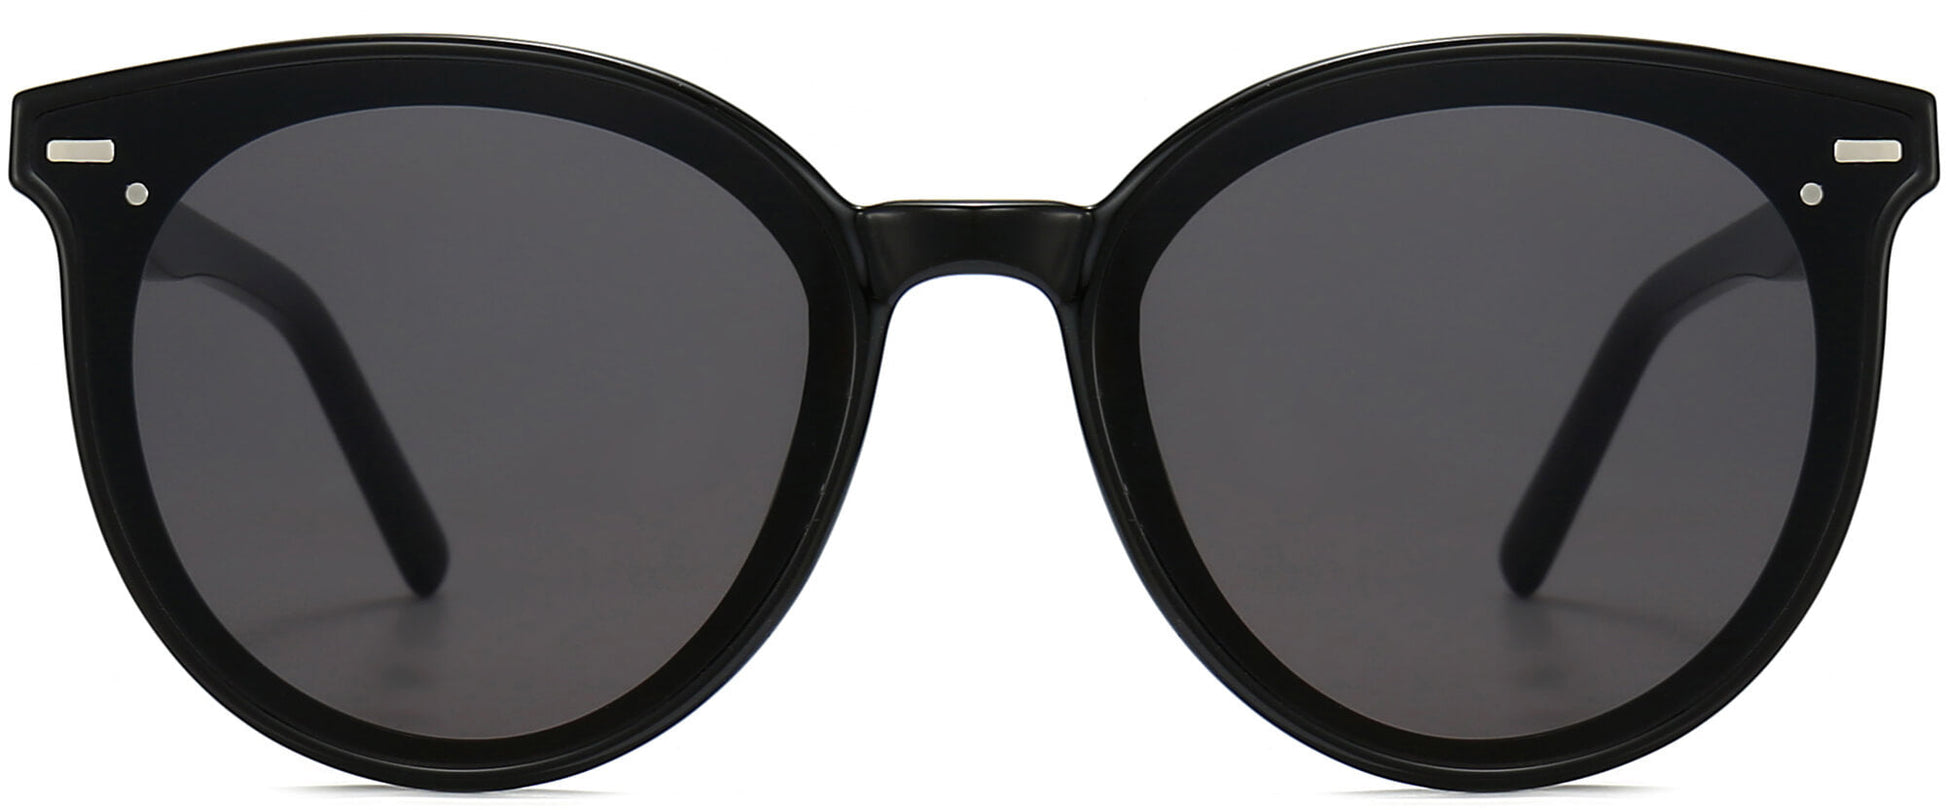 Julian Black Stainless steel Sunglasses from ANRRI, front view